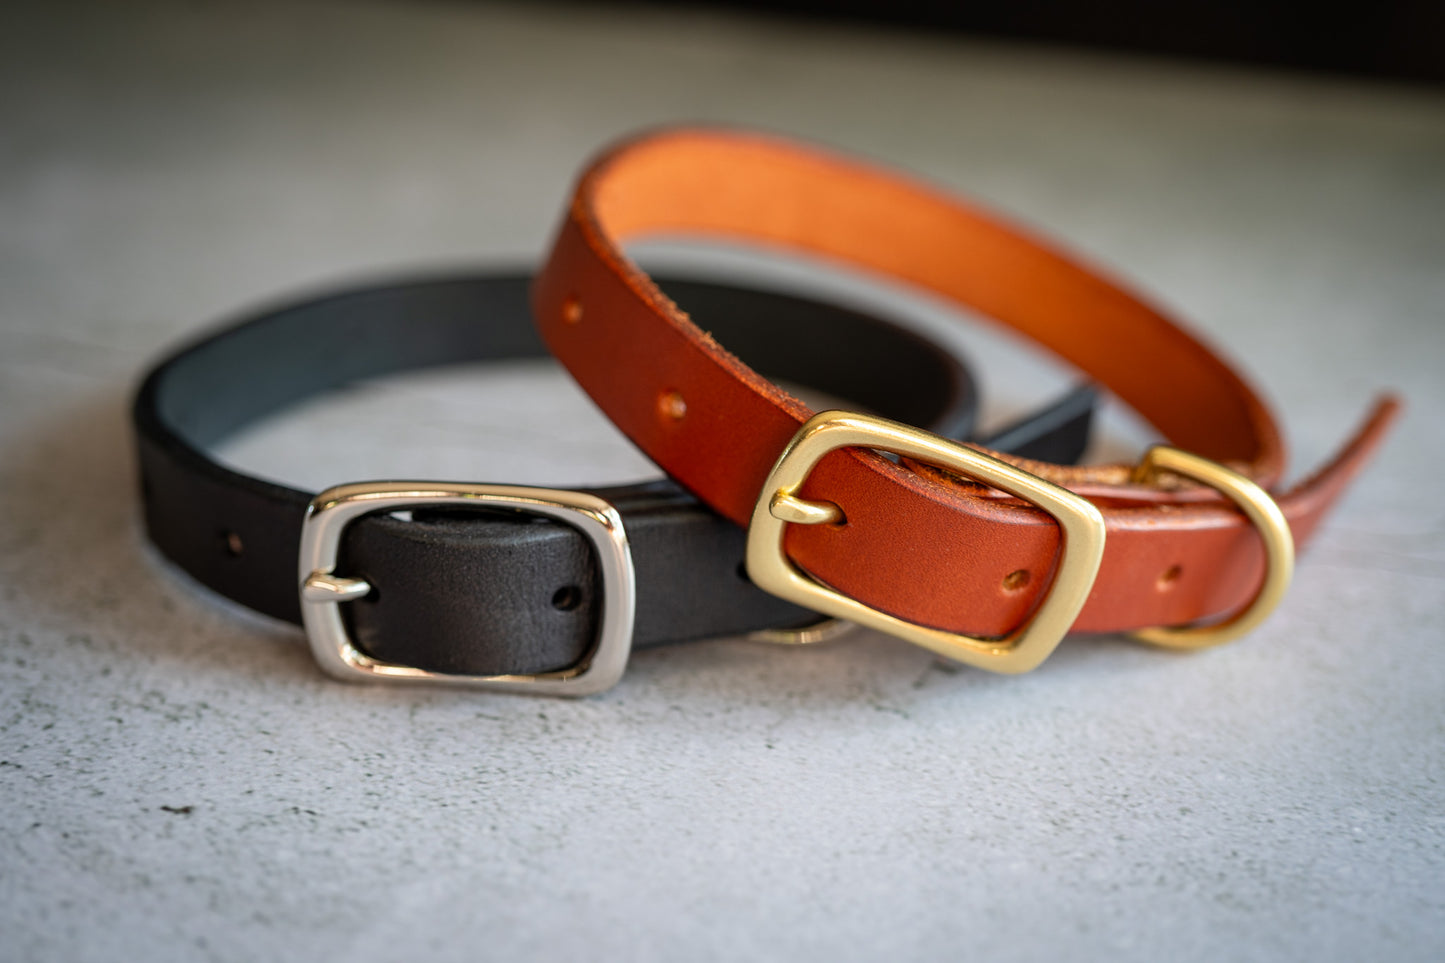 Handmade and custom leather dog collars 3/4 inch and 2 colors: brown and black.